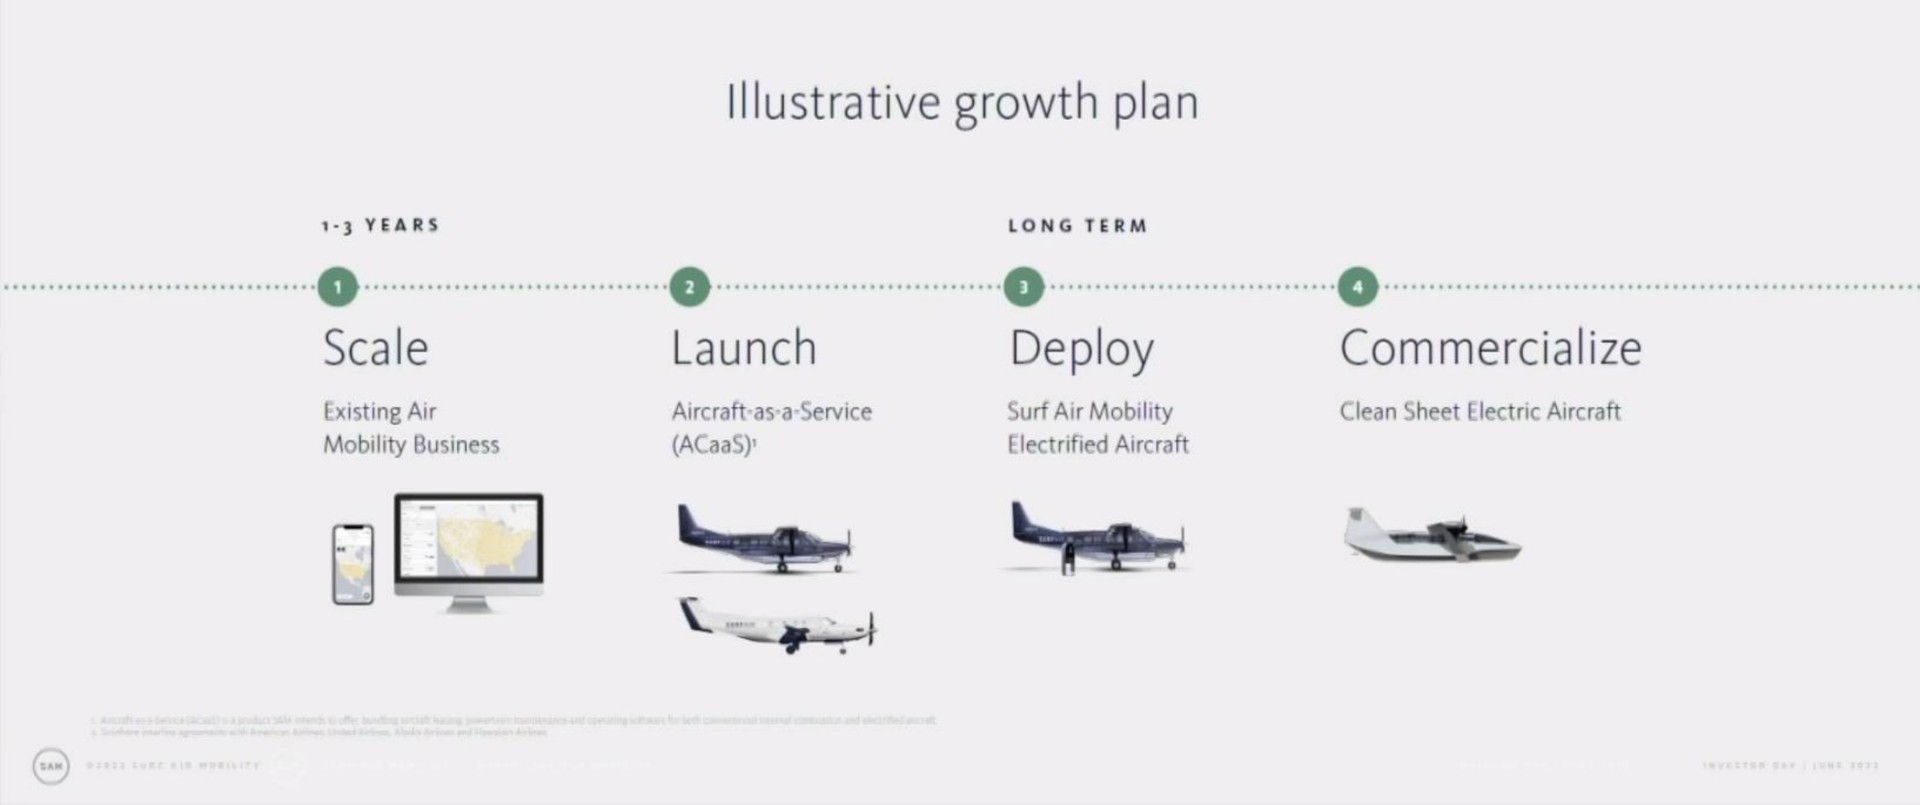 illustrative growth plan years long term scale existing air mobility business launch aircraft as a service deploy surf air mobility electrified aircraft hep commercialize clean sheet electric aircraft | Surf Air